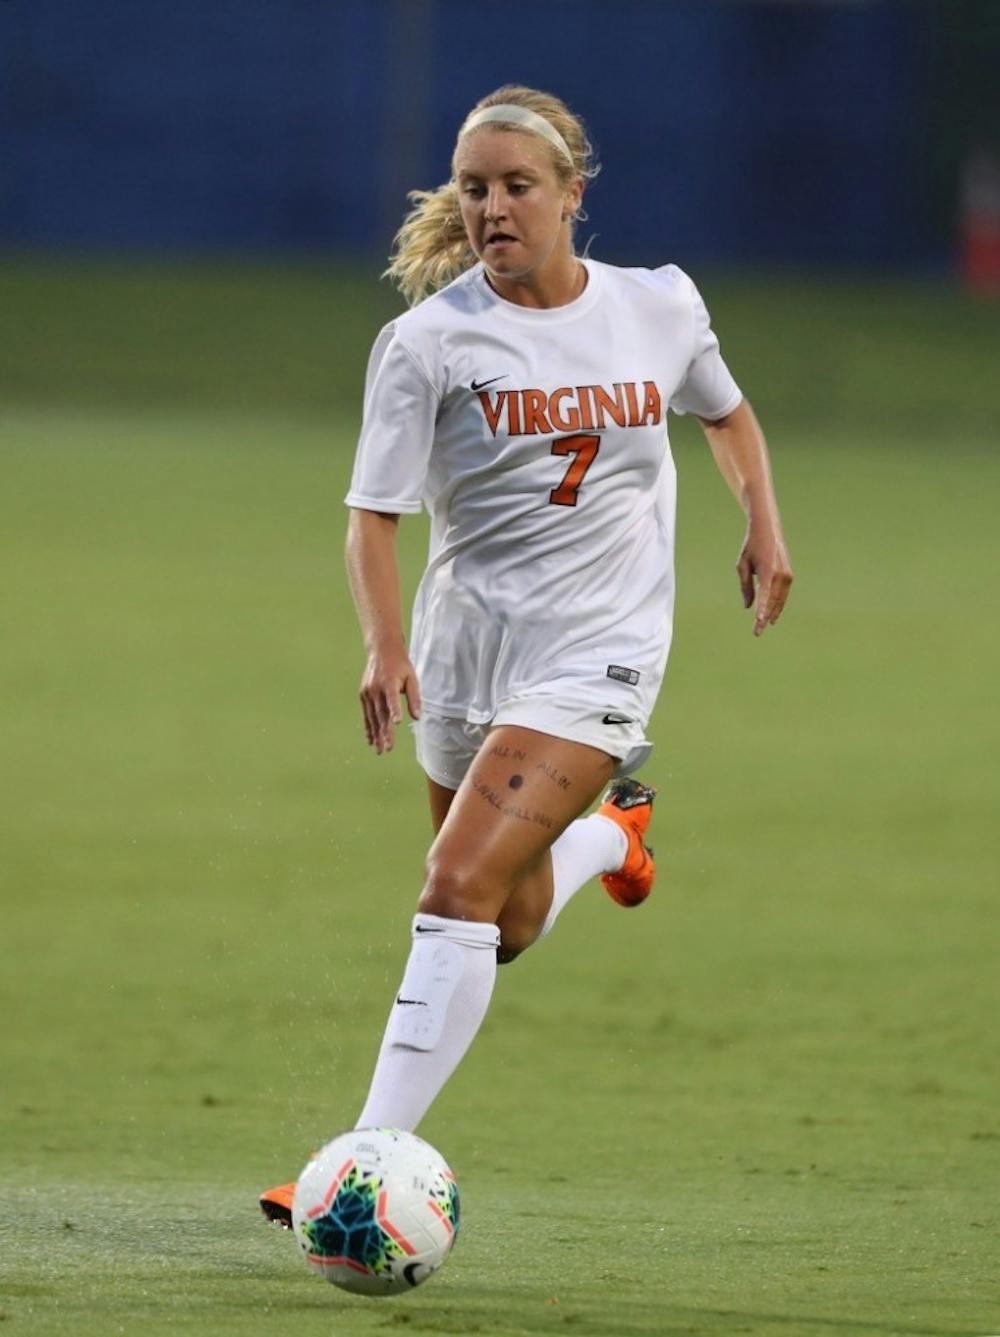 <p>Sophomore midfielder Alexa Spaanstra picked up her third goal against the Hurricanes to lead to the 3-0 victory.&nbsp;</p>